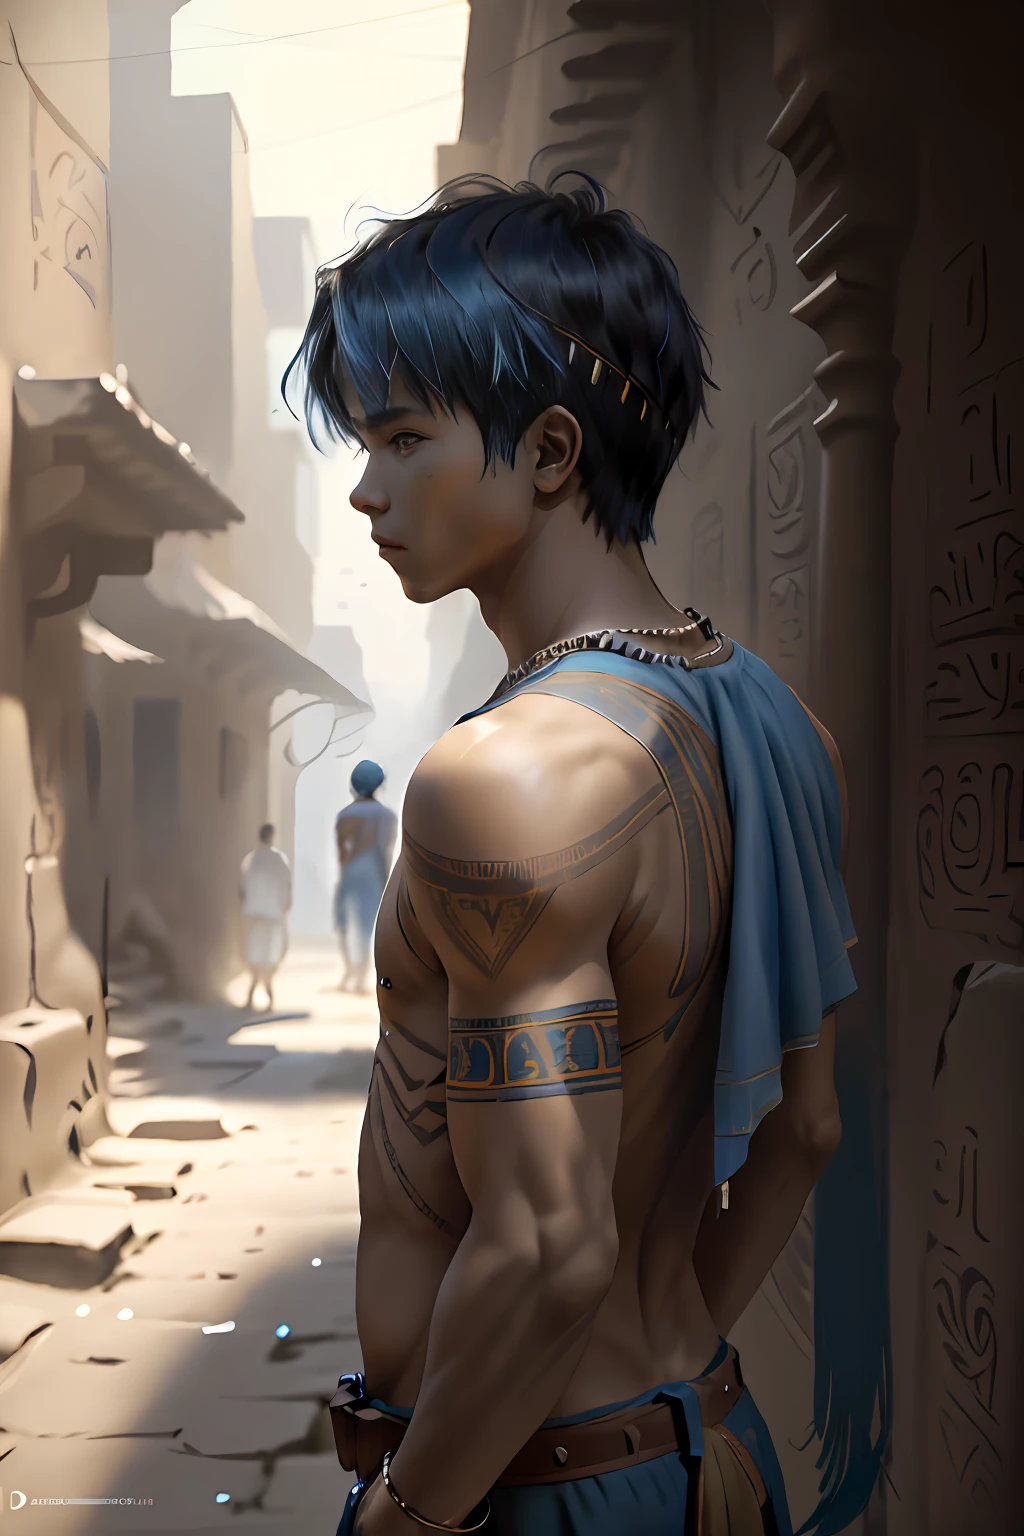 has 14 years old blue hair, The 14-year-old boy with straight hair with his back uncovered and his chest bare but dressed in typical clothes of ancient Egypt with dark skin walking lost through the different streets of a city is noon. doferentes angulos mira la ciudad desde lo slto de una colina.